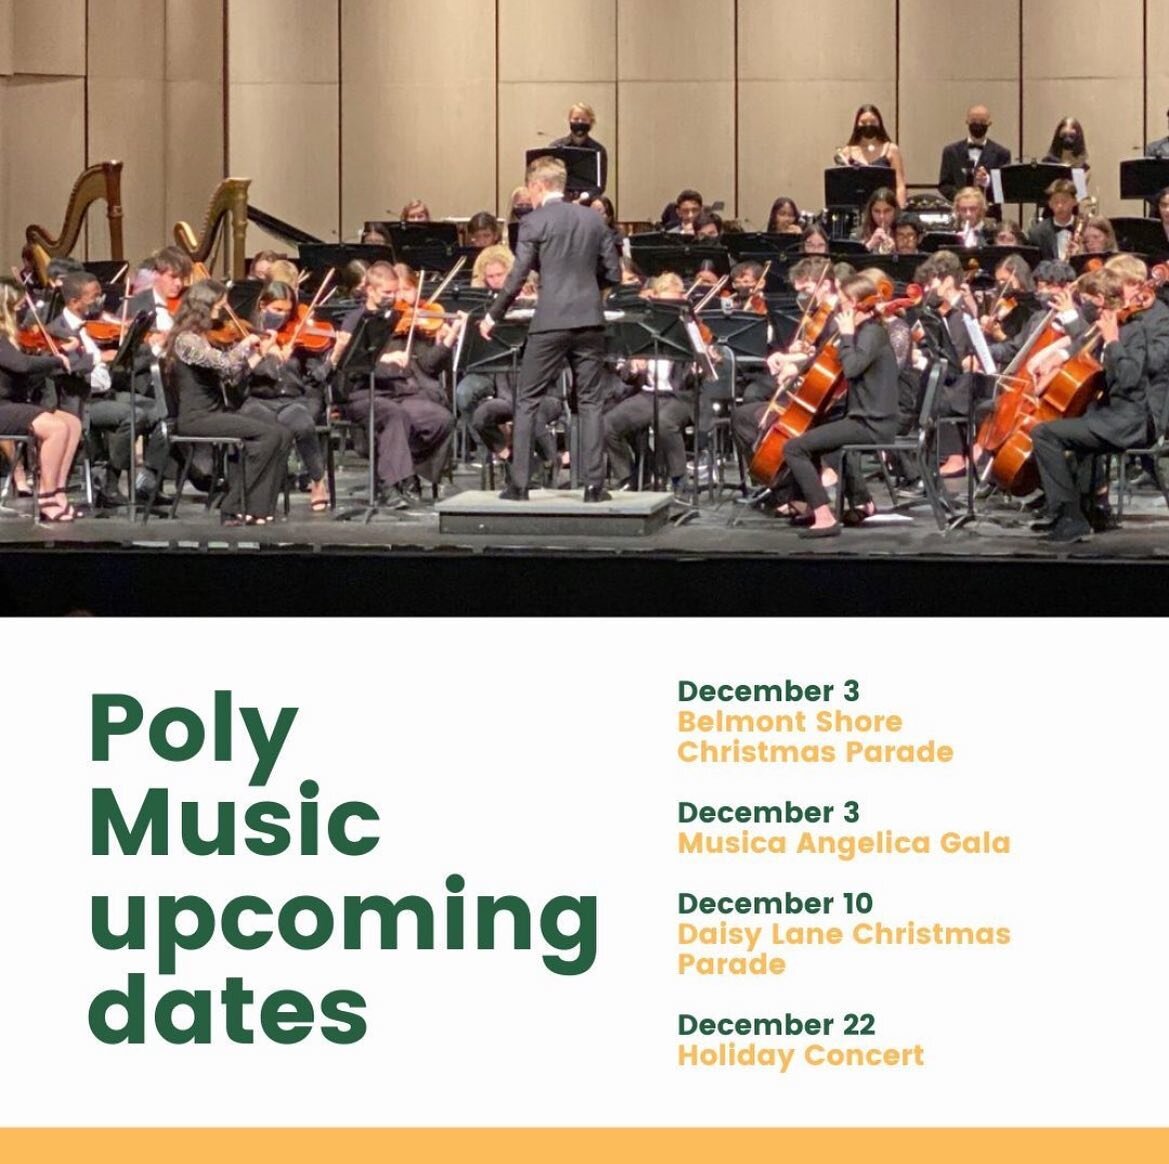 We would love to see you all at our upcoming Poly Music concerts! #lbpolypace #polymusic